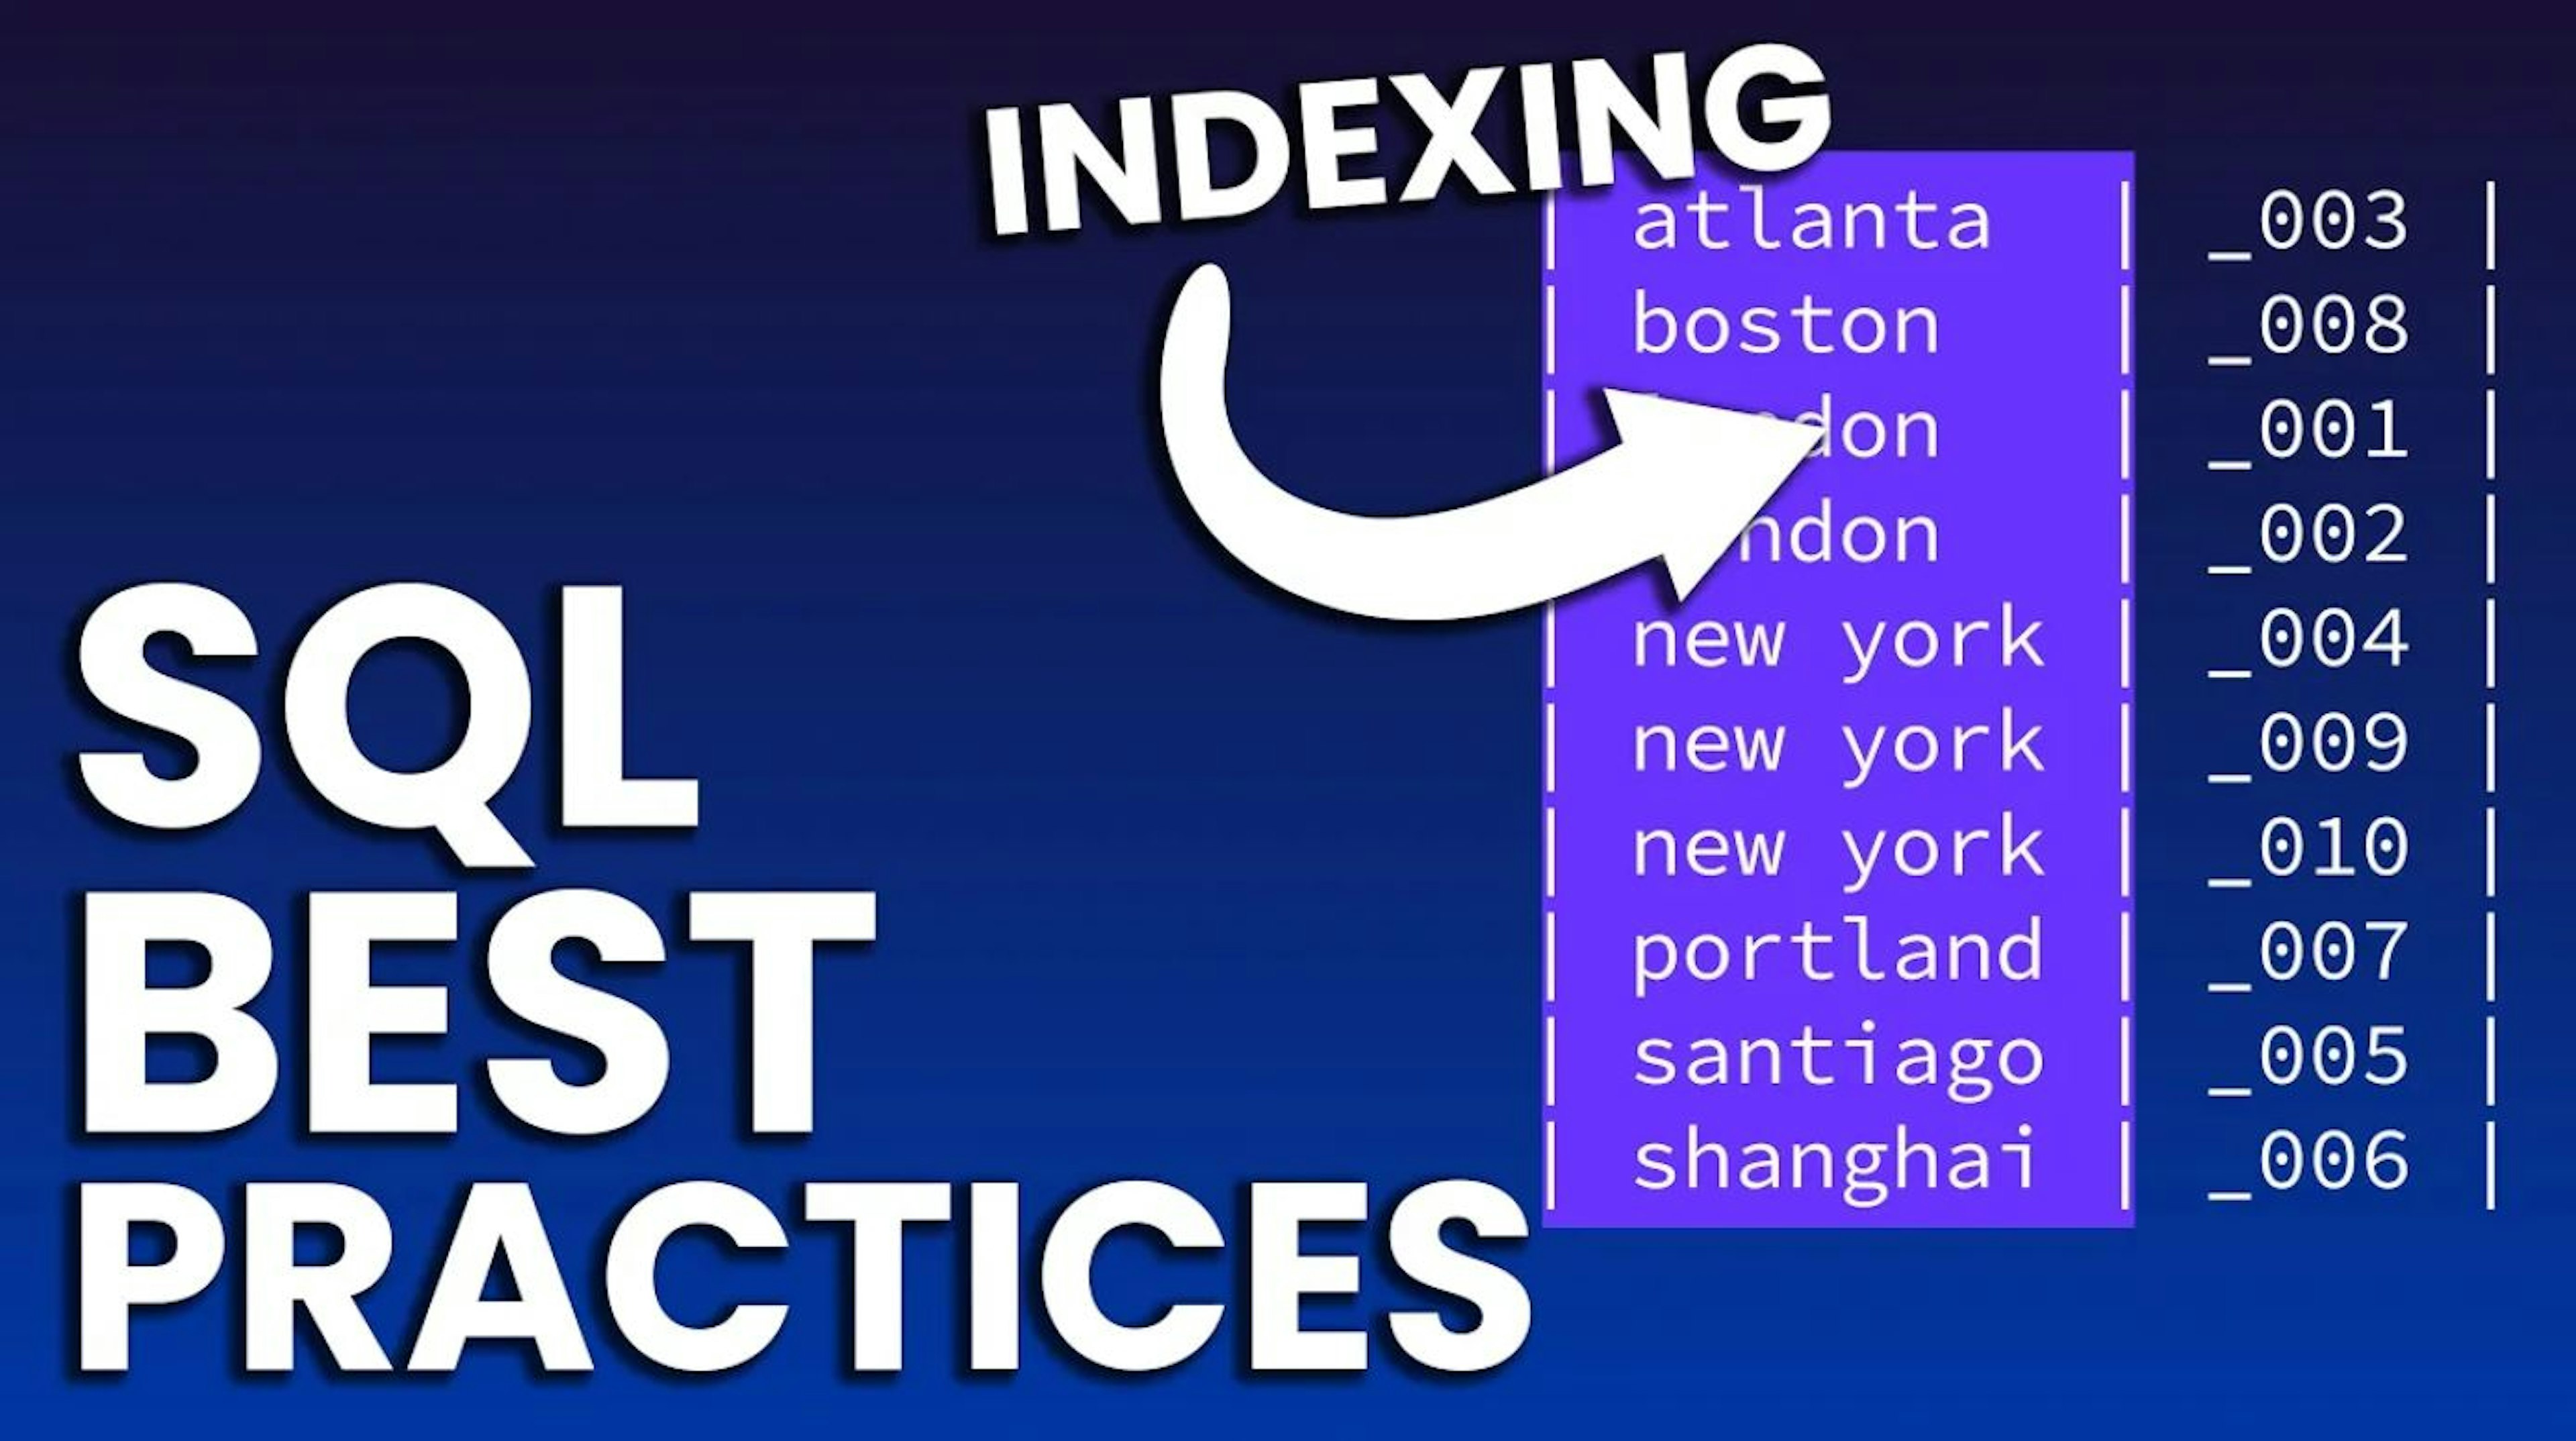 sql-indexing-best-practices-how-to-make-your-database-faster